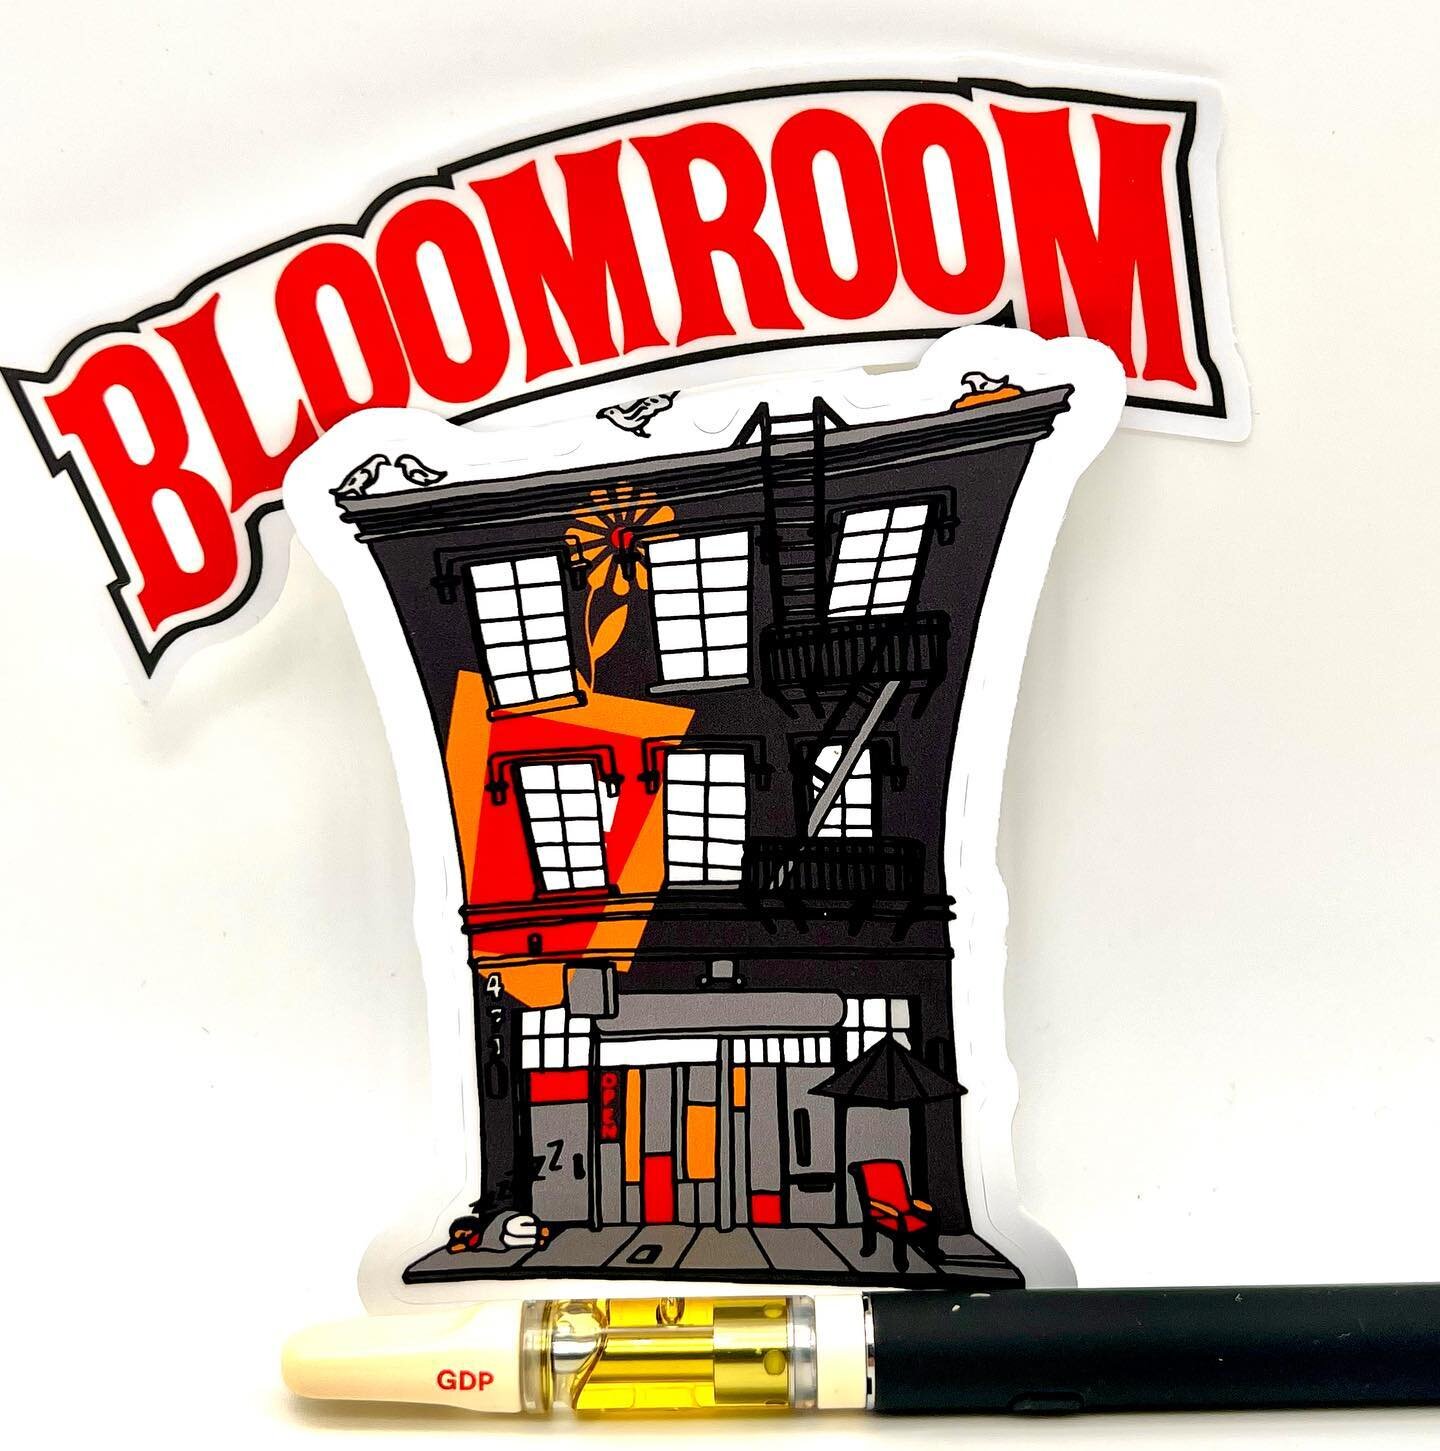 Blooom Rooooooom!🐞🍄🌹🍁
Bloom Catridges(1G) &amp; Disposables(.035g)are available just for YOU! Come save a little money with the crazy 30(%)promotion going on at both stores! 🌁🌅
#notforsale #lifestyle #bloomroomdispensaries #vapes #cityliving #b